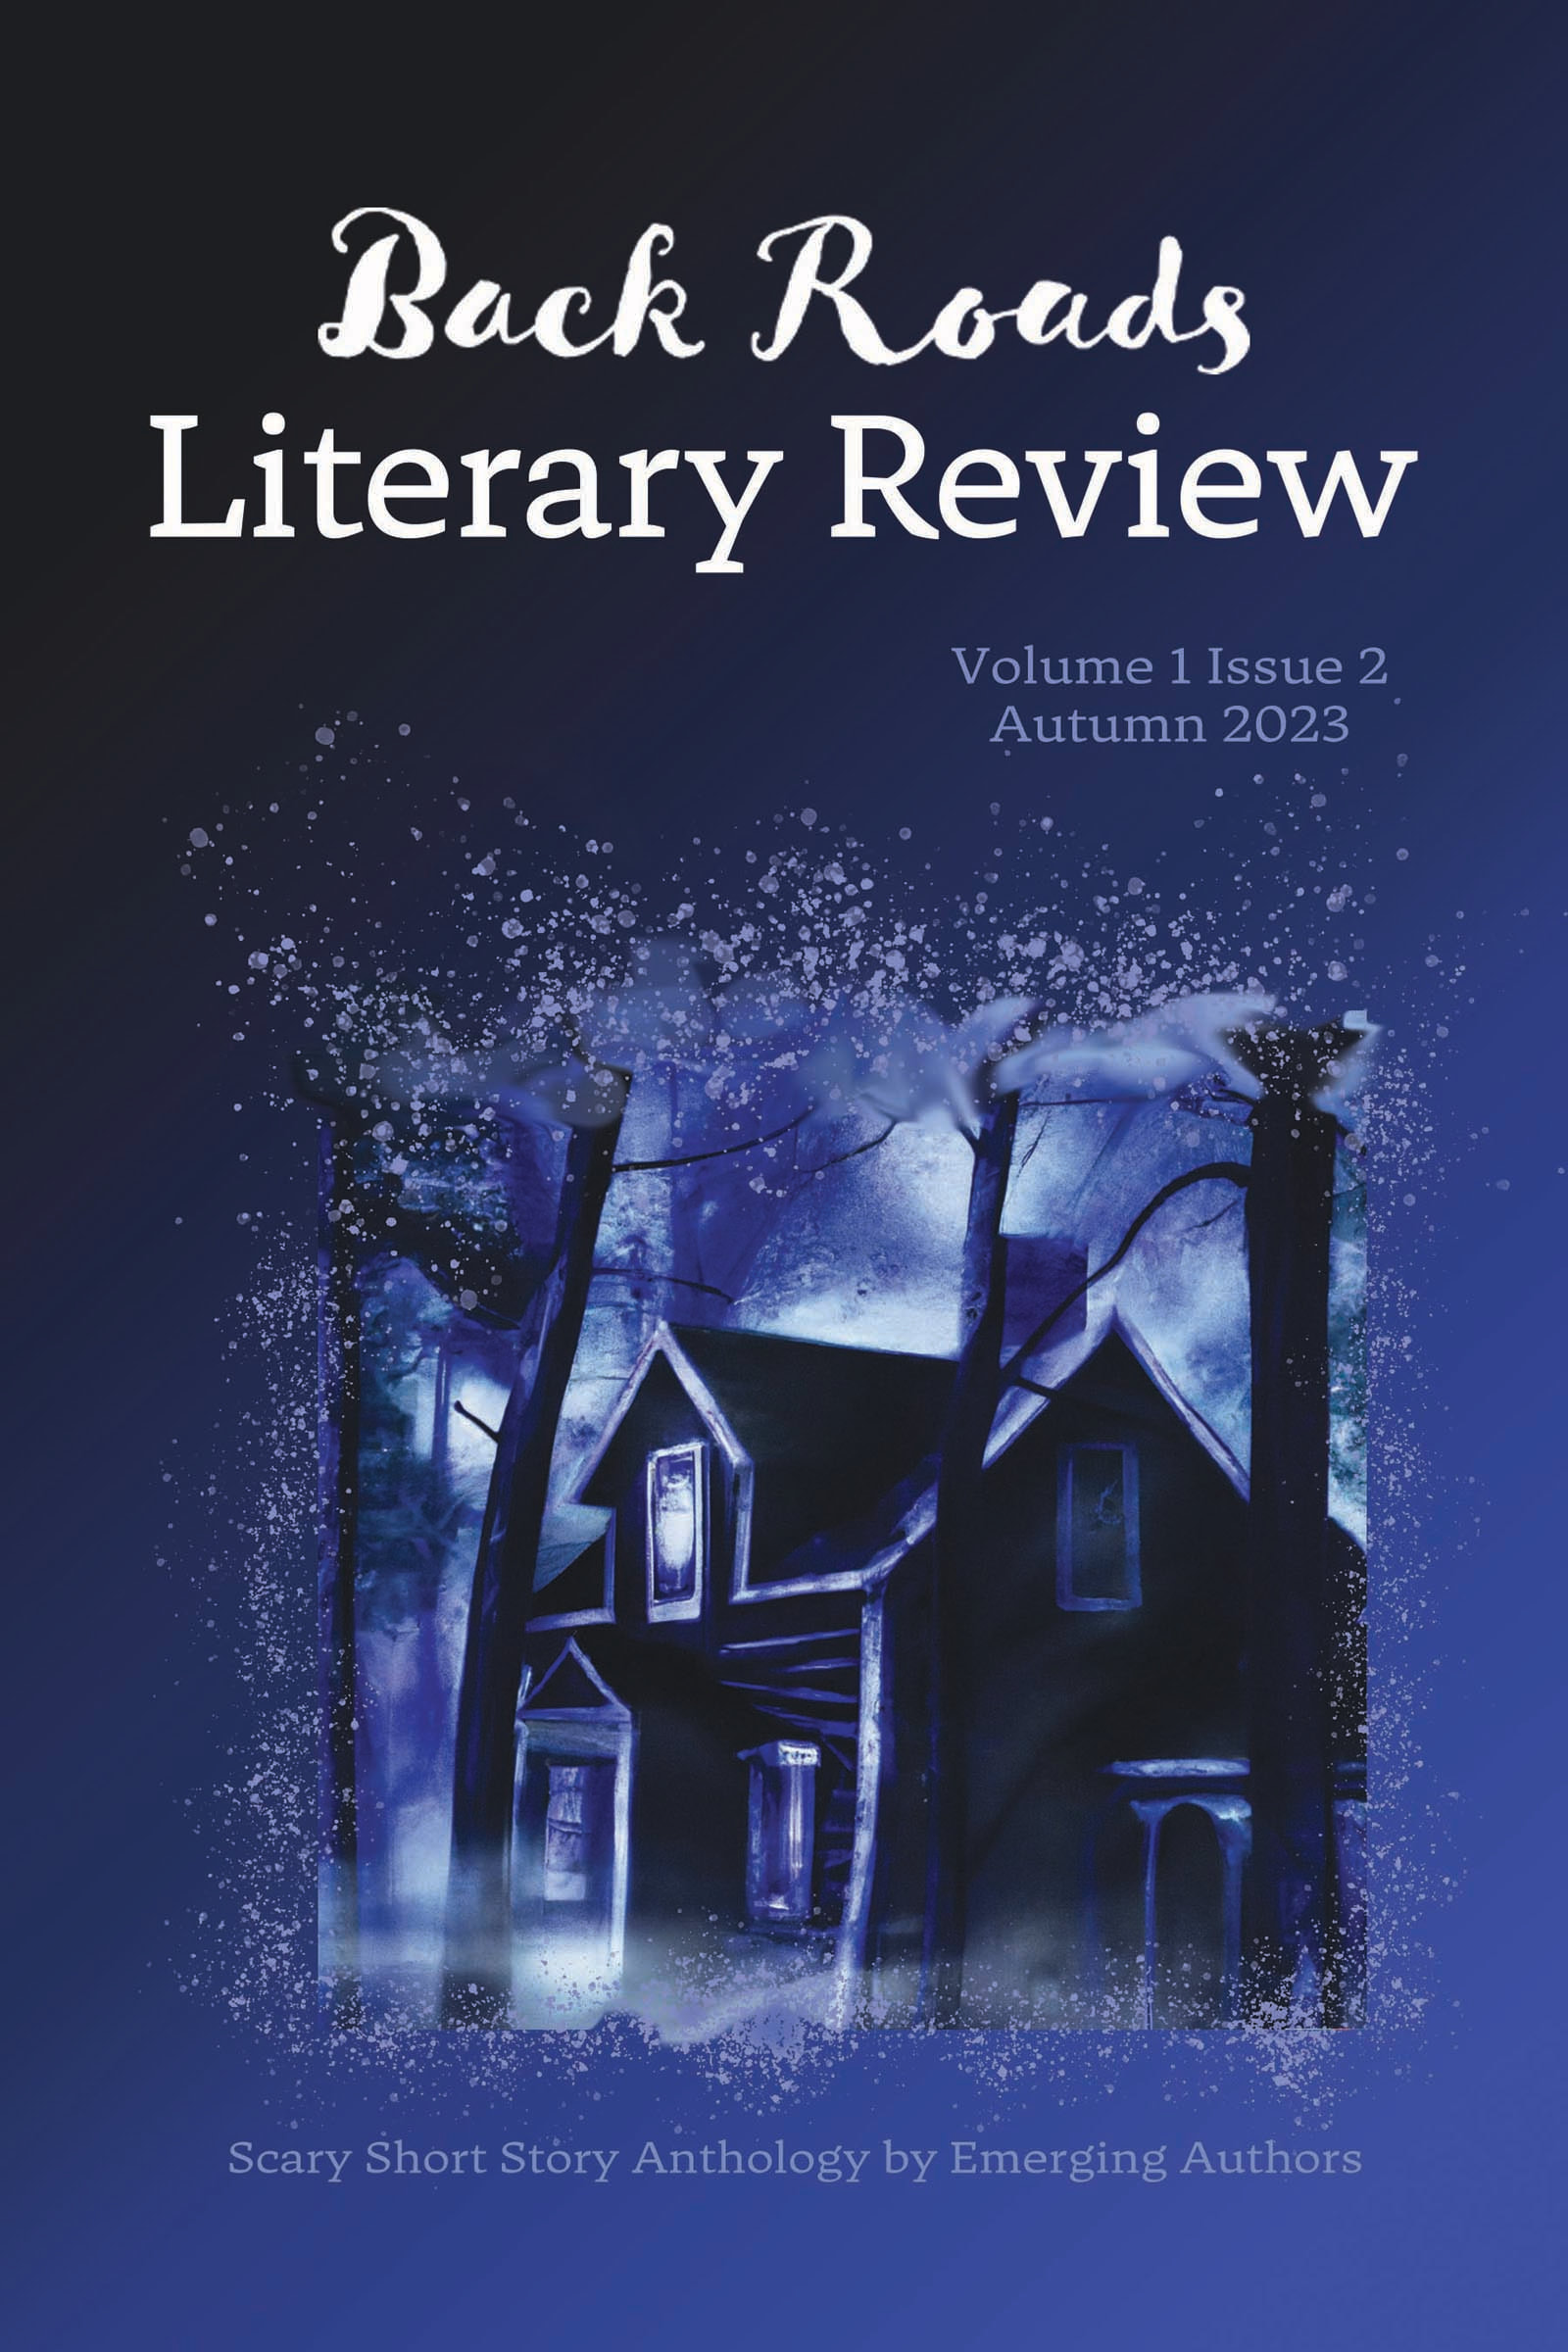 Back Roads Literary Review Anthology